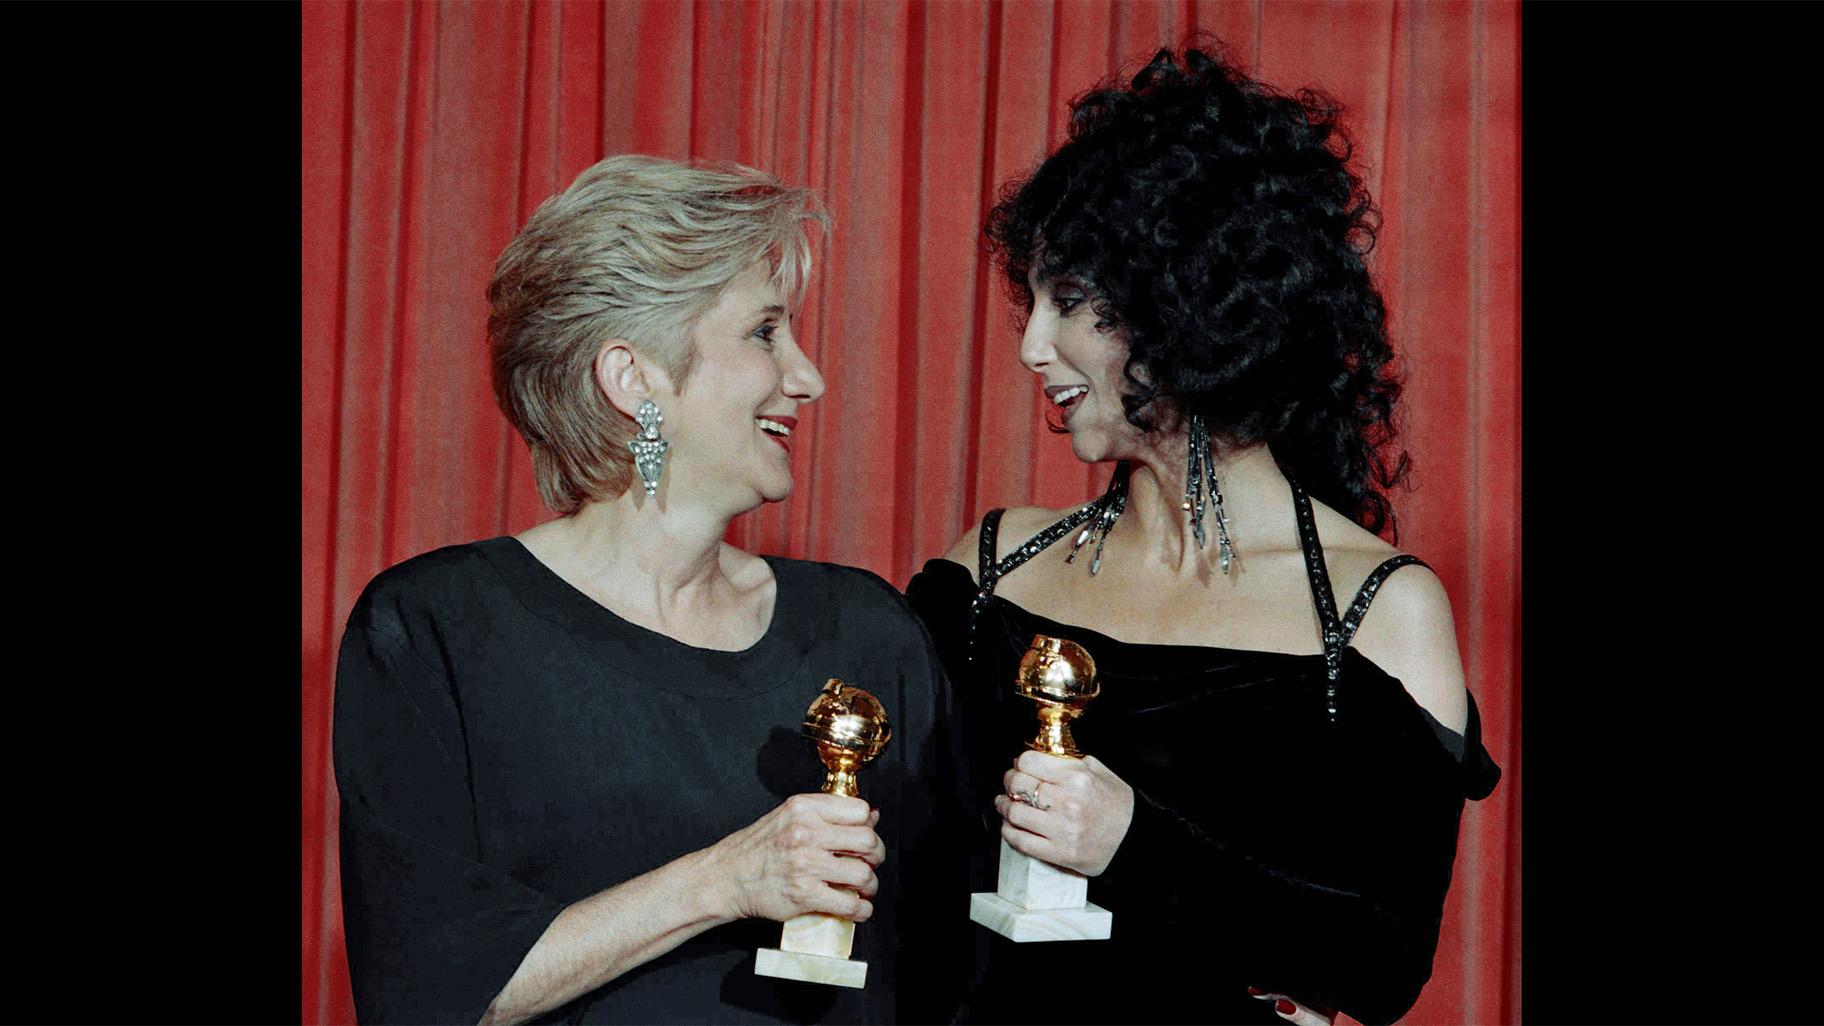 In this Jan. 24, 1988 file photo, actress Olympia Dukakis, winner of a Golden Globe for “Best Performance in a Supporting Role” and Cher, winner of the “Best Performance by an Actress in a musical or comedy,” hold the awards they received for performances in the hit movie “Moonstruck” at the Beverly Hilton Hotel. (AP Photo / Reed Saxon, File)